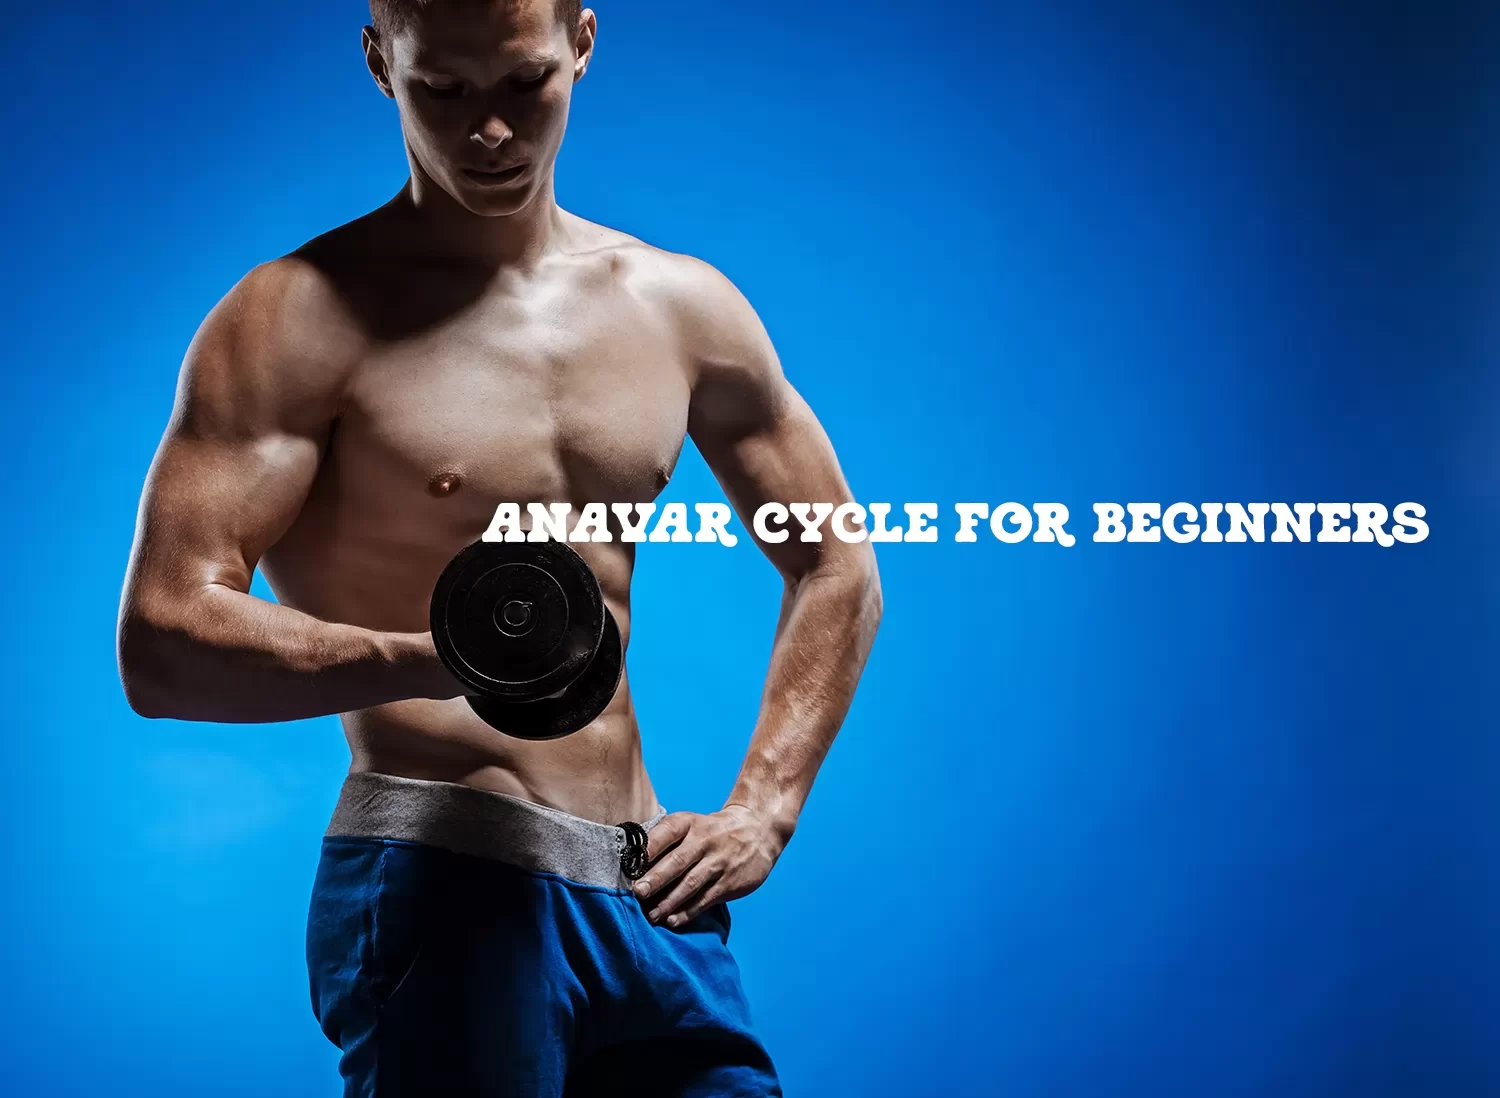 Anavar cycle for beginners